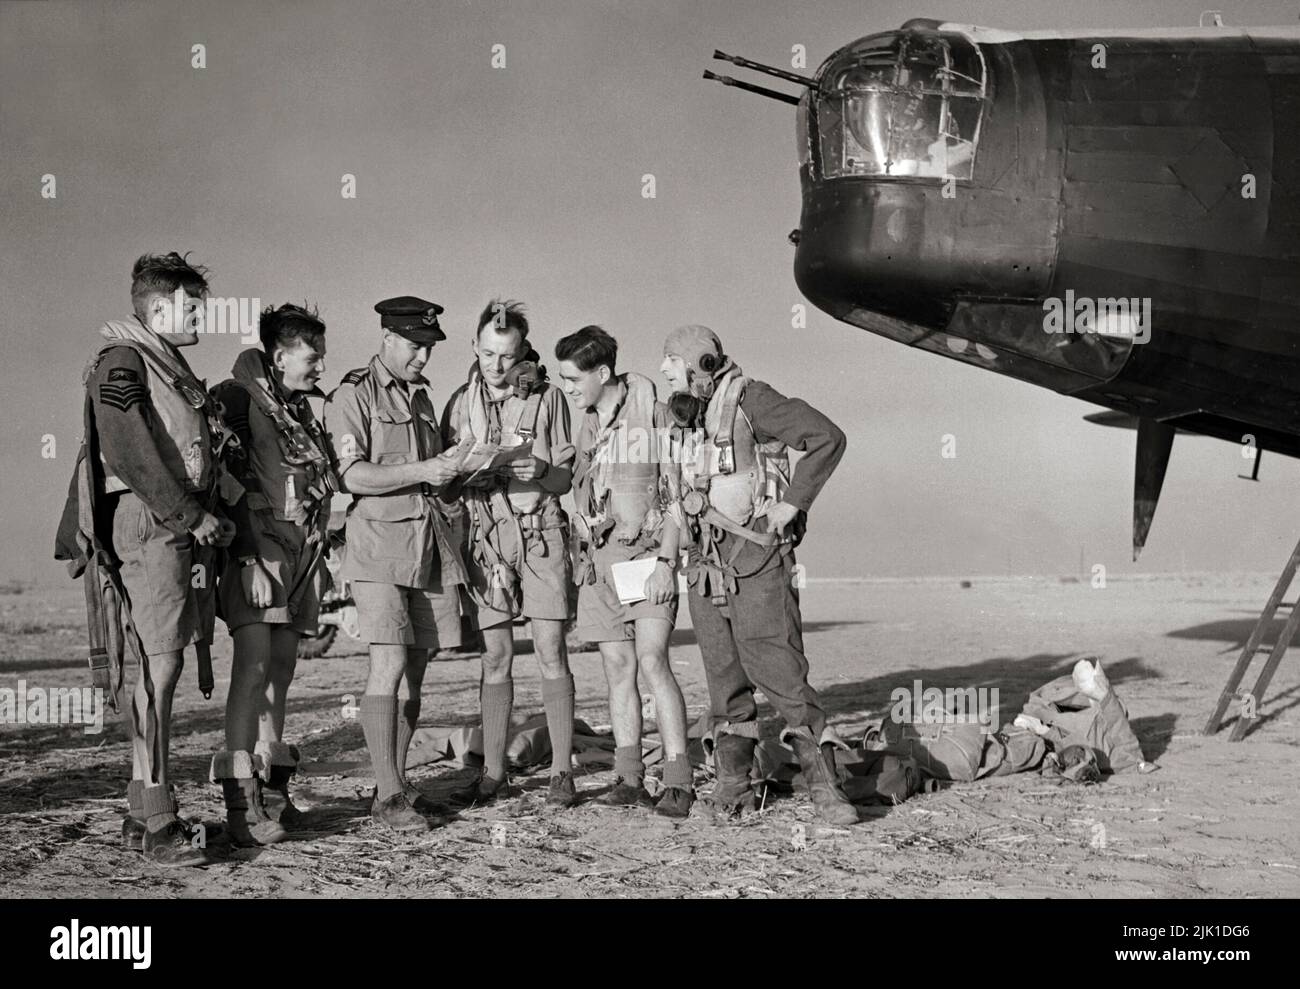 The crew of a Vickers Wellington Mark X of 150 Squadron RAF receive a final briefing from their flight commander before taking off from Kairouan, Tunisia, for a raid on targets in the Salerno area on the day before the Allied landings. The Wellington was a British twin-engined, long-range medium bomber designed in the mid-1930s used as a night bomber in the early years of the Second World War,  until superseded by the larger four-engined 'heavies' such as the Avro Lancaster. It holds the distinction of having been the only British bomber that was produced for the duration of the war. Stock Photo